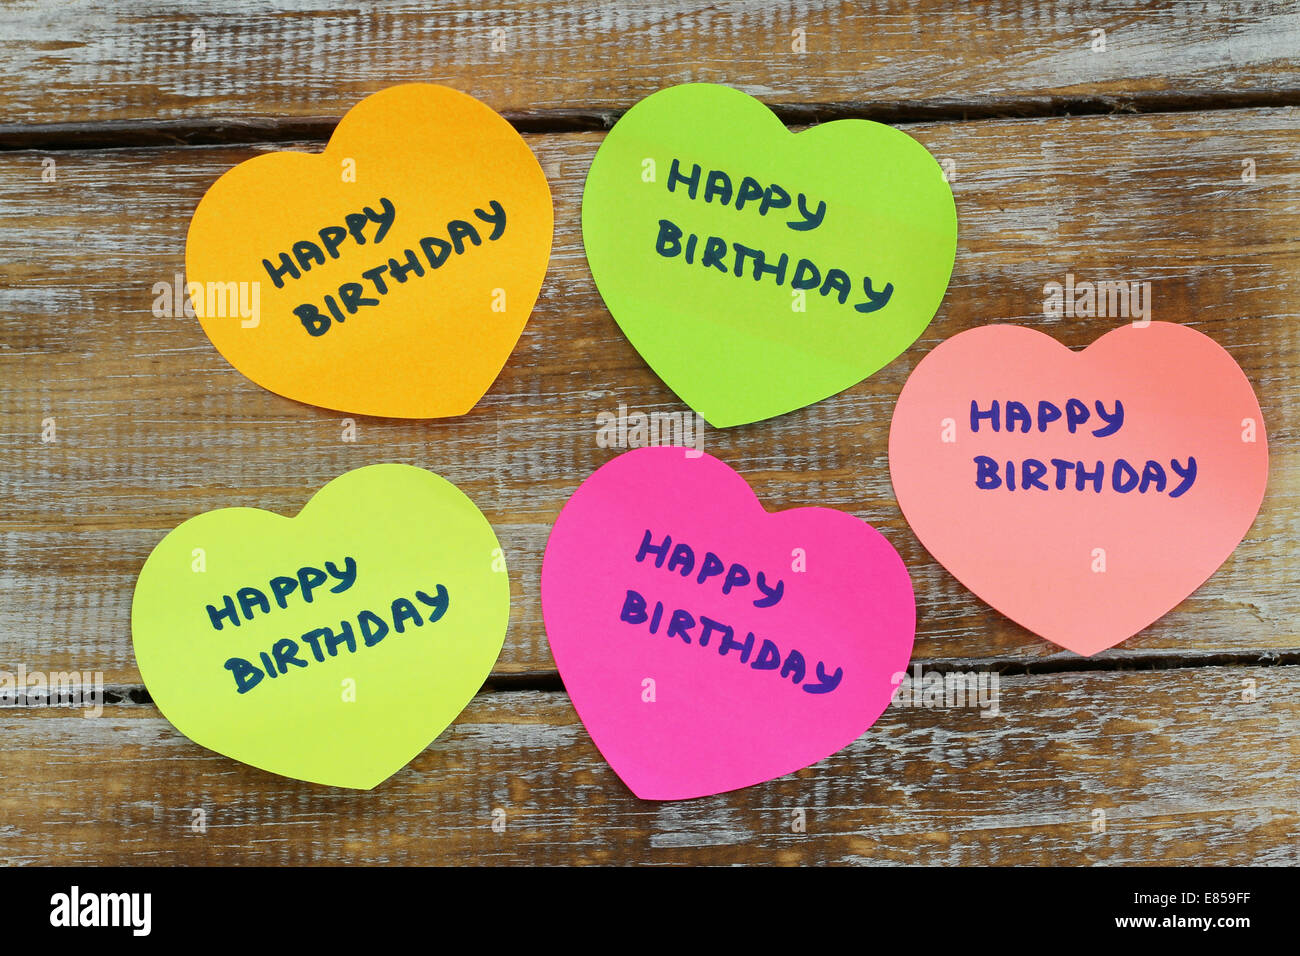 Happy birthday card with colorful paper hearts Stock Photo